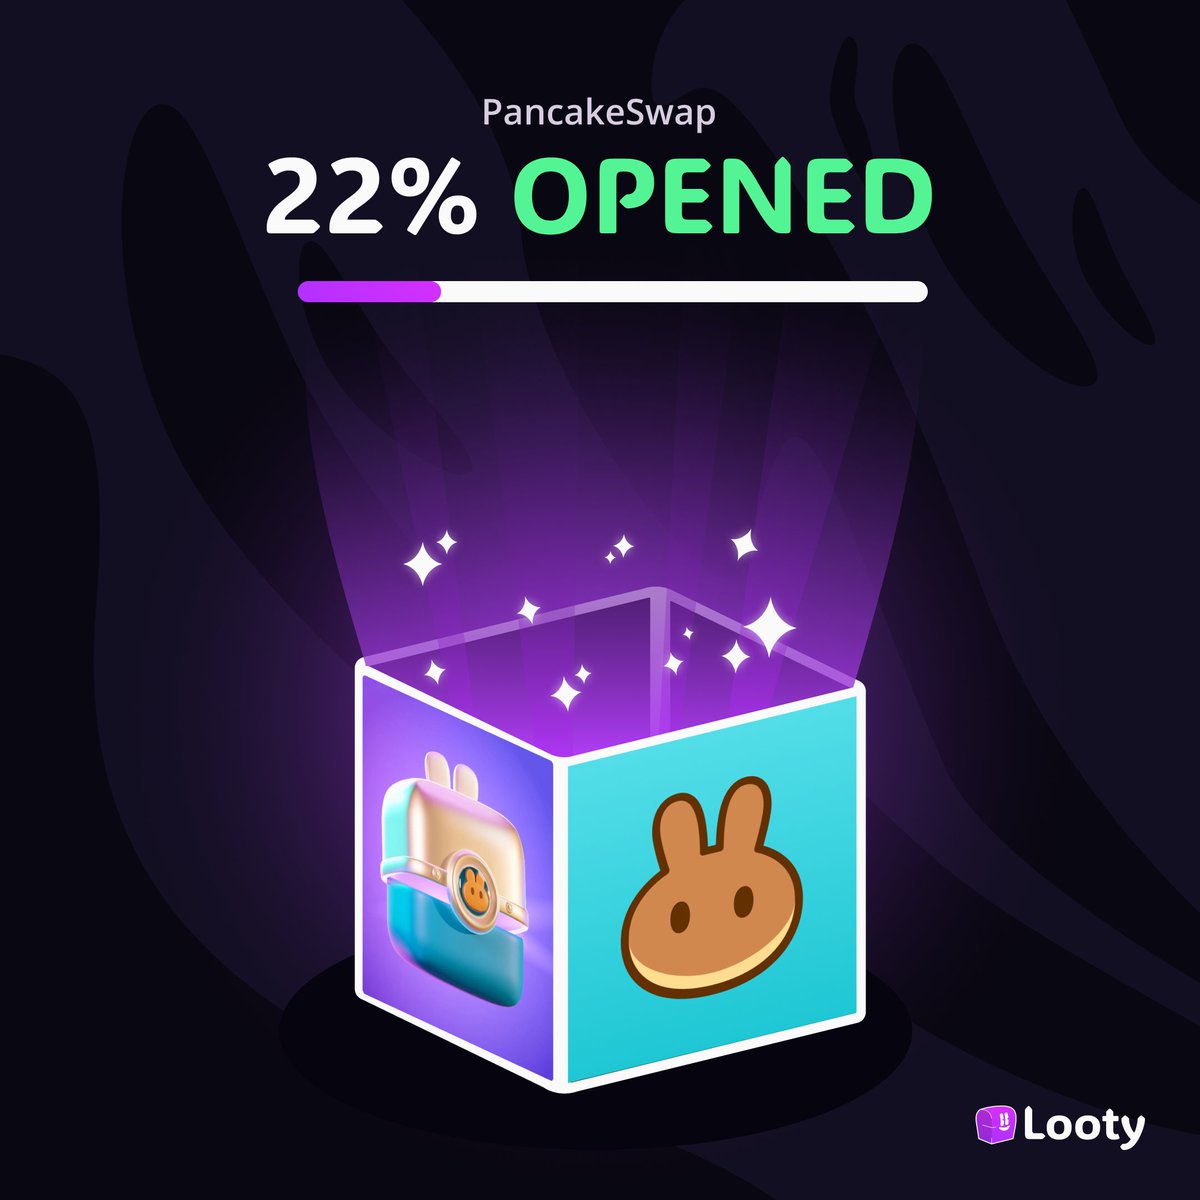 INSPire Fiesta Lootboxes are ~22% opened! 🥳 If you haven’t opened yours... what are you waiting for anon? For all the hard work you put into @PancakeSwap's INSPire Fiesta, claim your $INSP rewards today! 💎